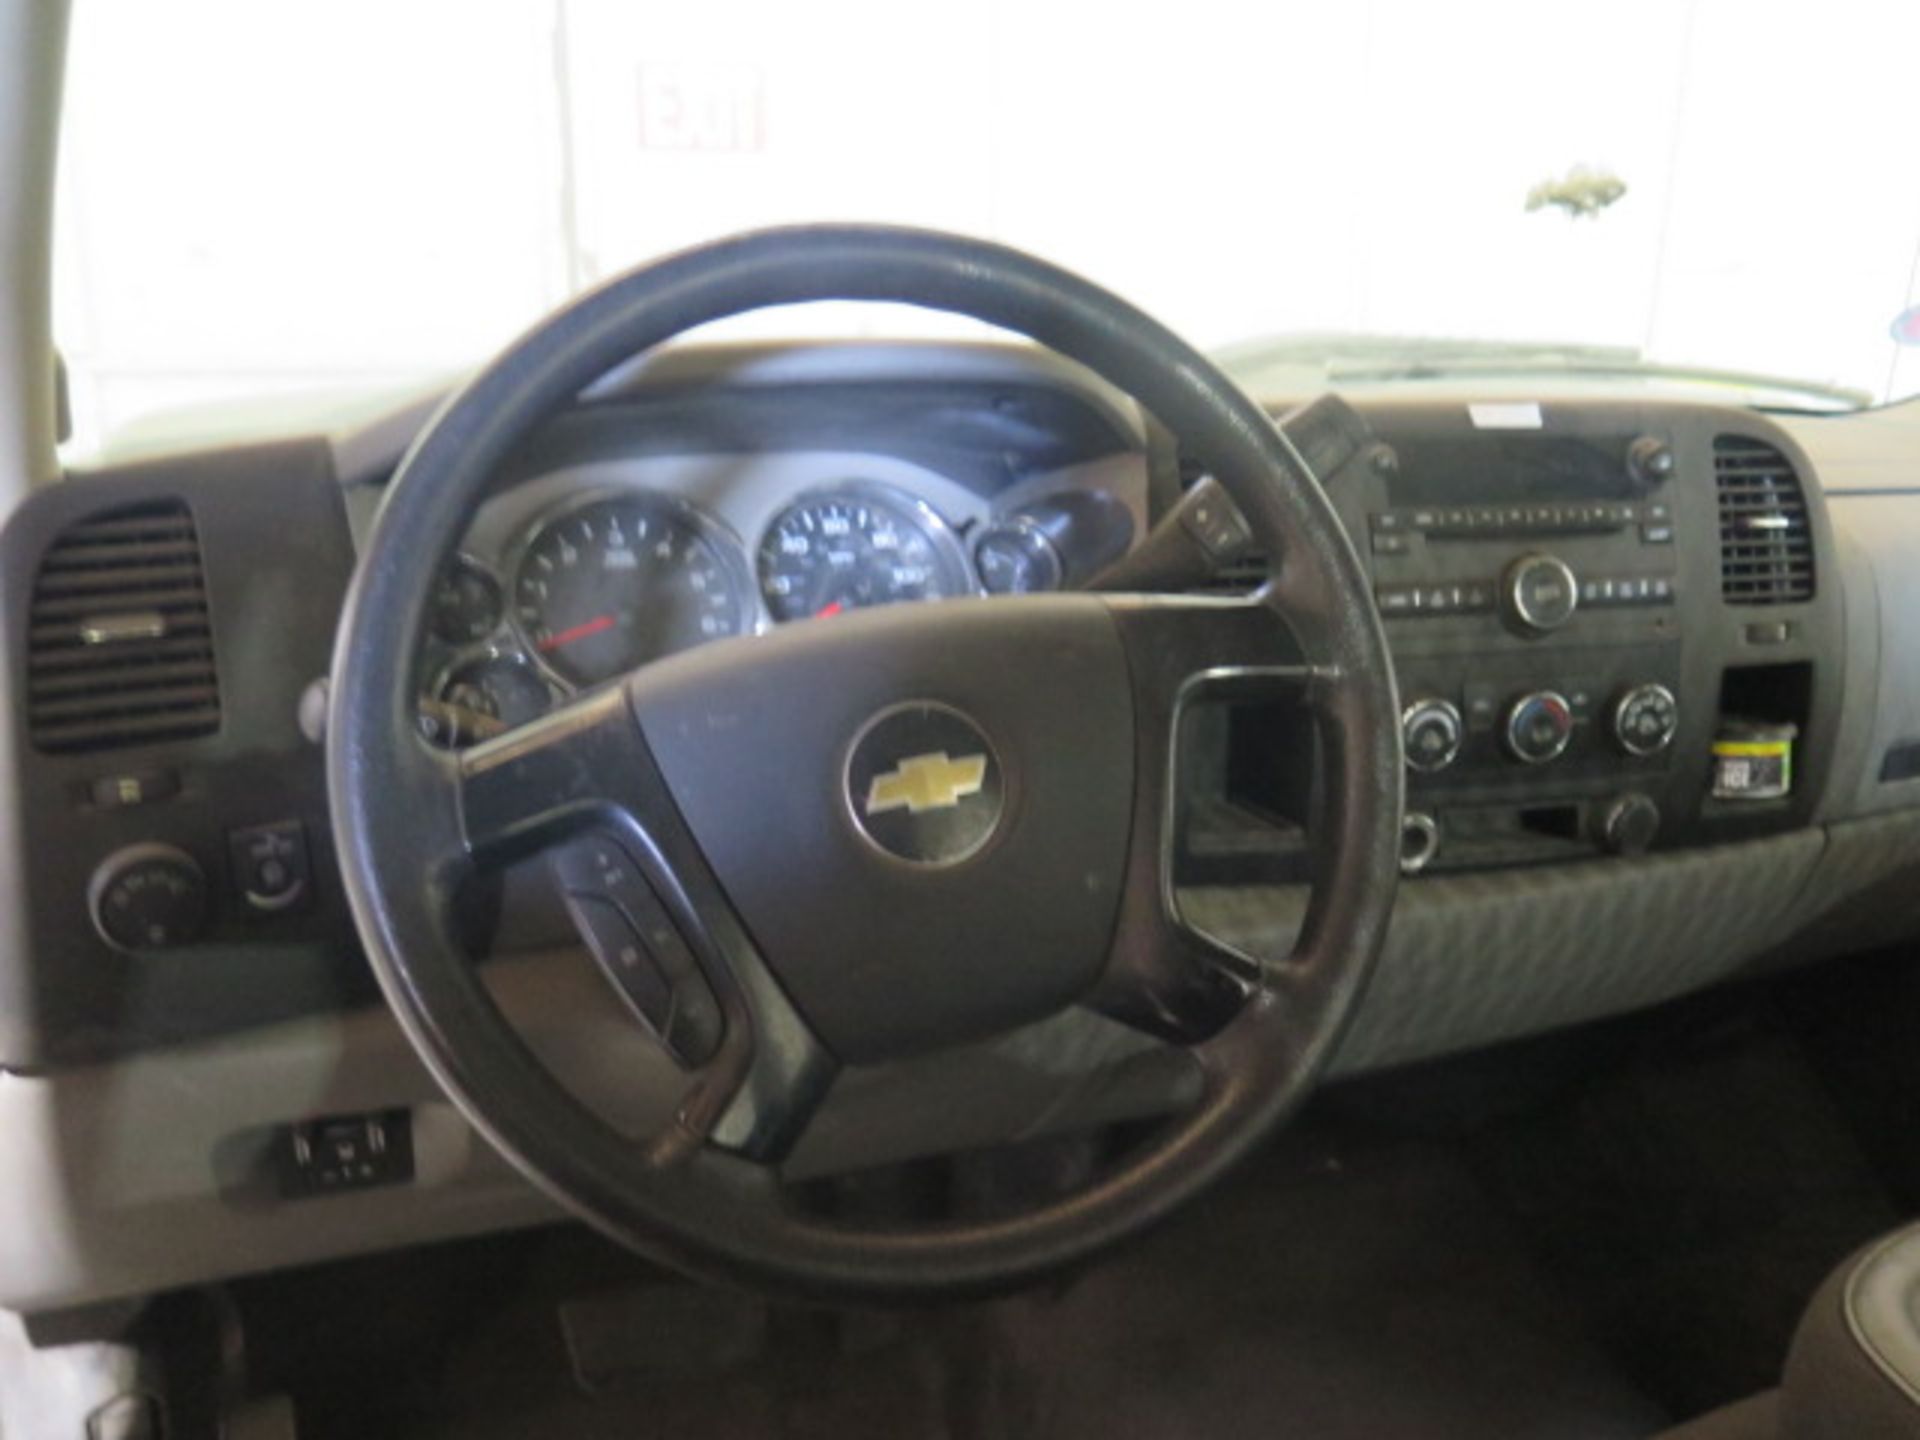 2011 Chevrolet Silverado 3500HD Service Truck Lisc# 26696D1 w/ Vortec 8-Cyl Gas Engine, SOLD AS IS - Image 13 of 23